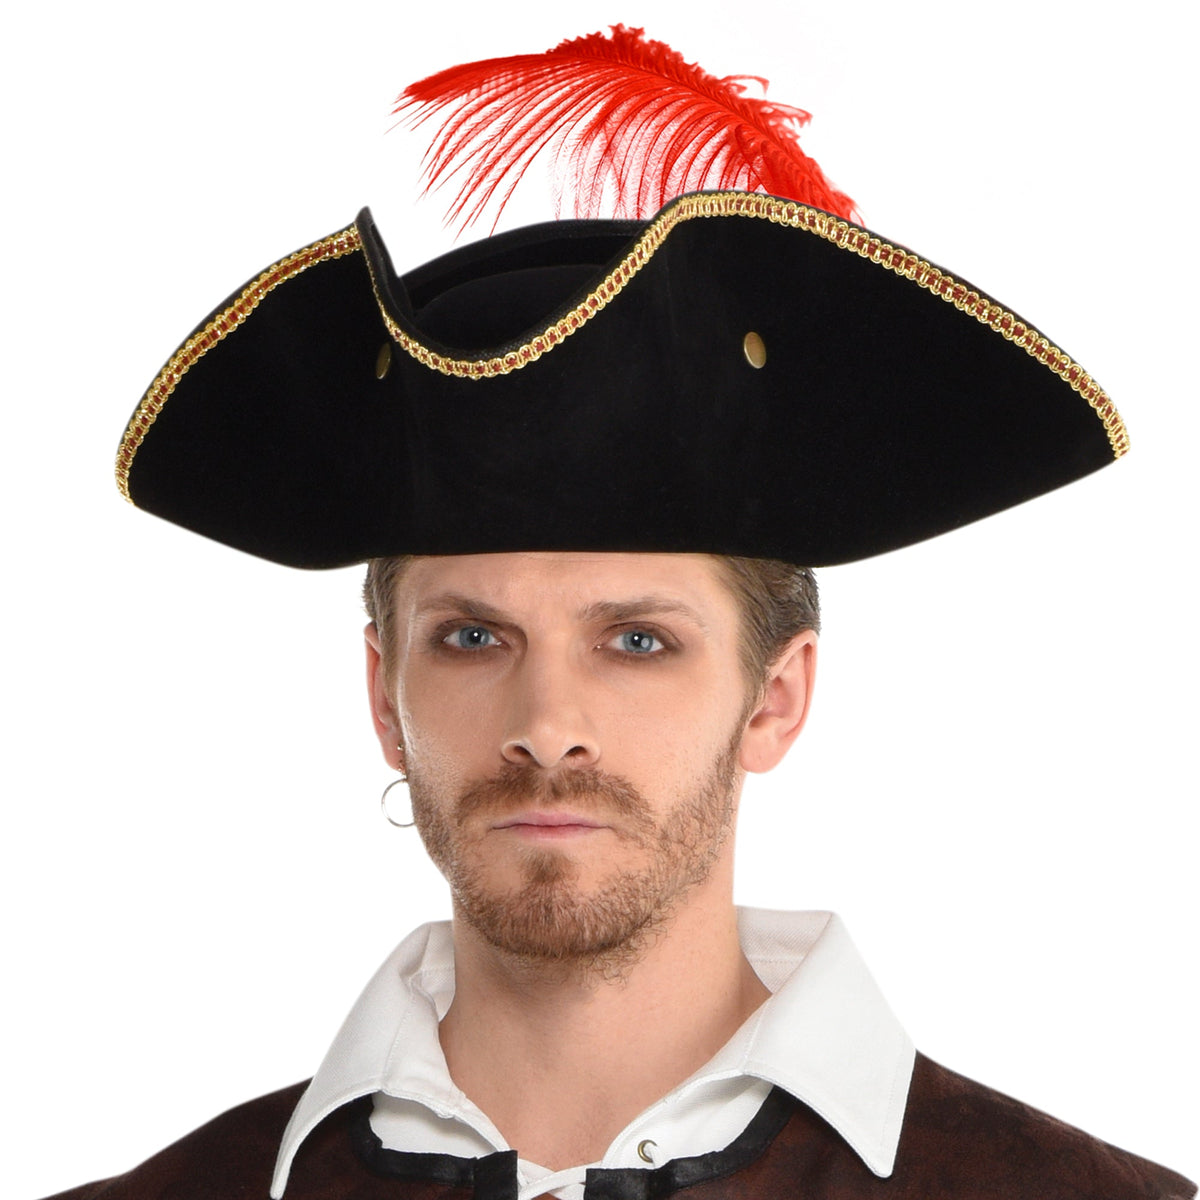 SUIT YOURSELF COSTUME CO. Costume Accessories Buccaneer Hat for Adults 192937180648